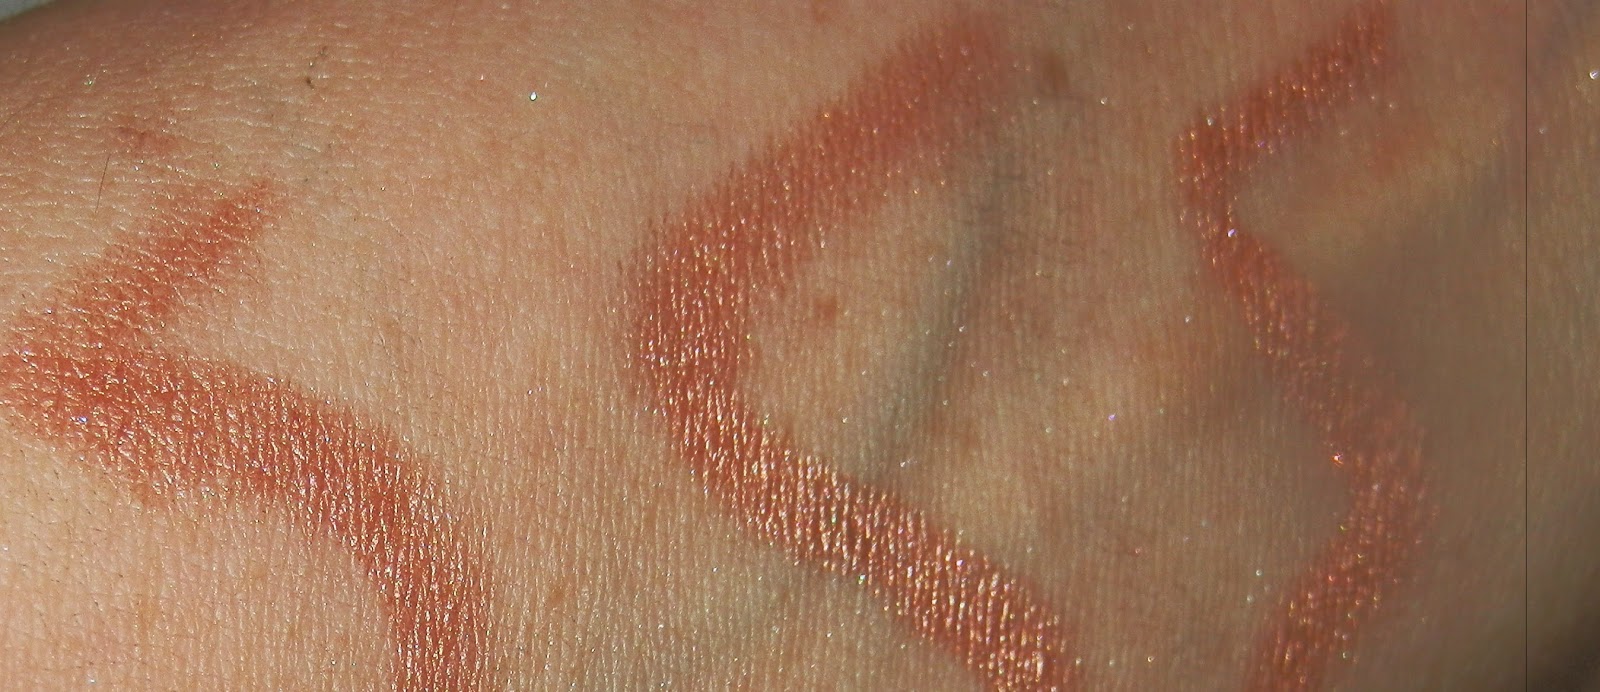 Rimmel Scandaleyes Shadow Stick by Kate Rose Gold Swatches 